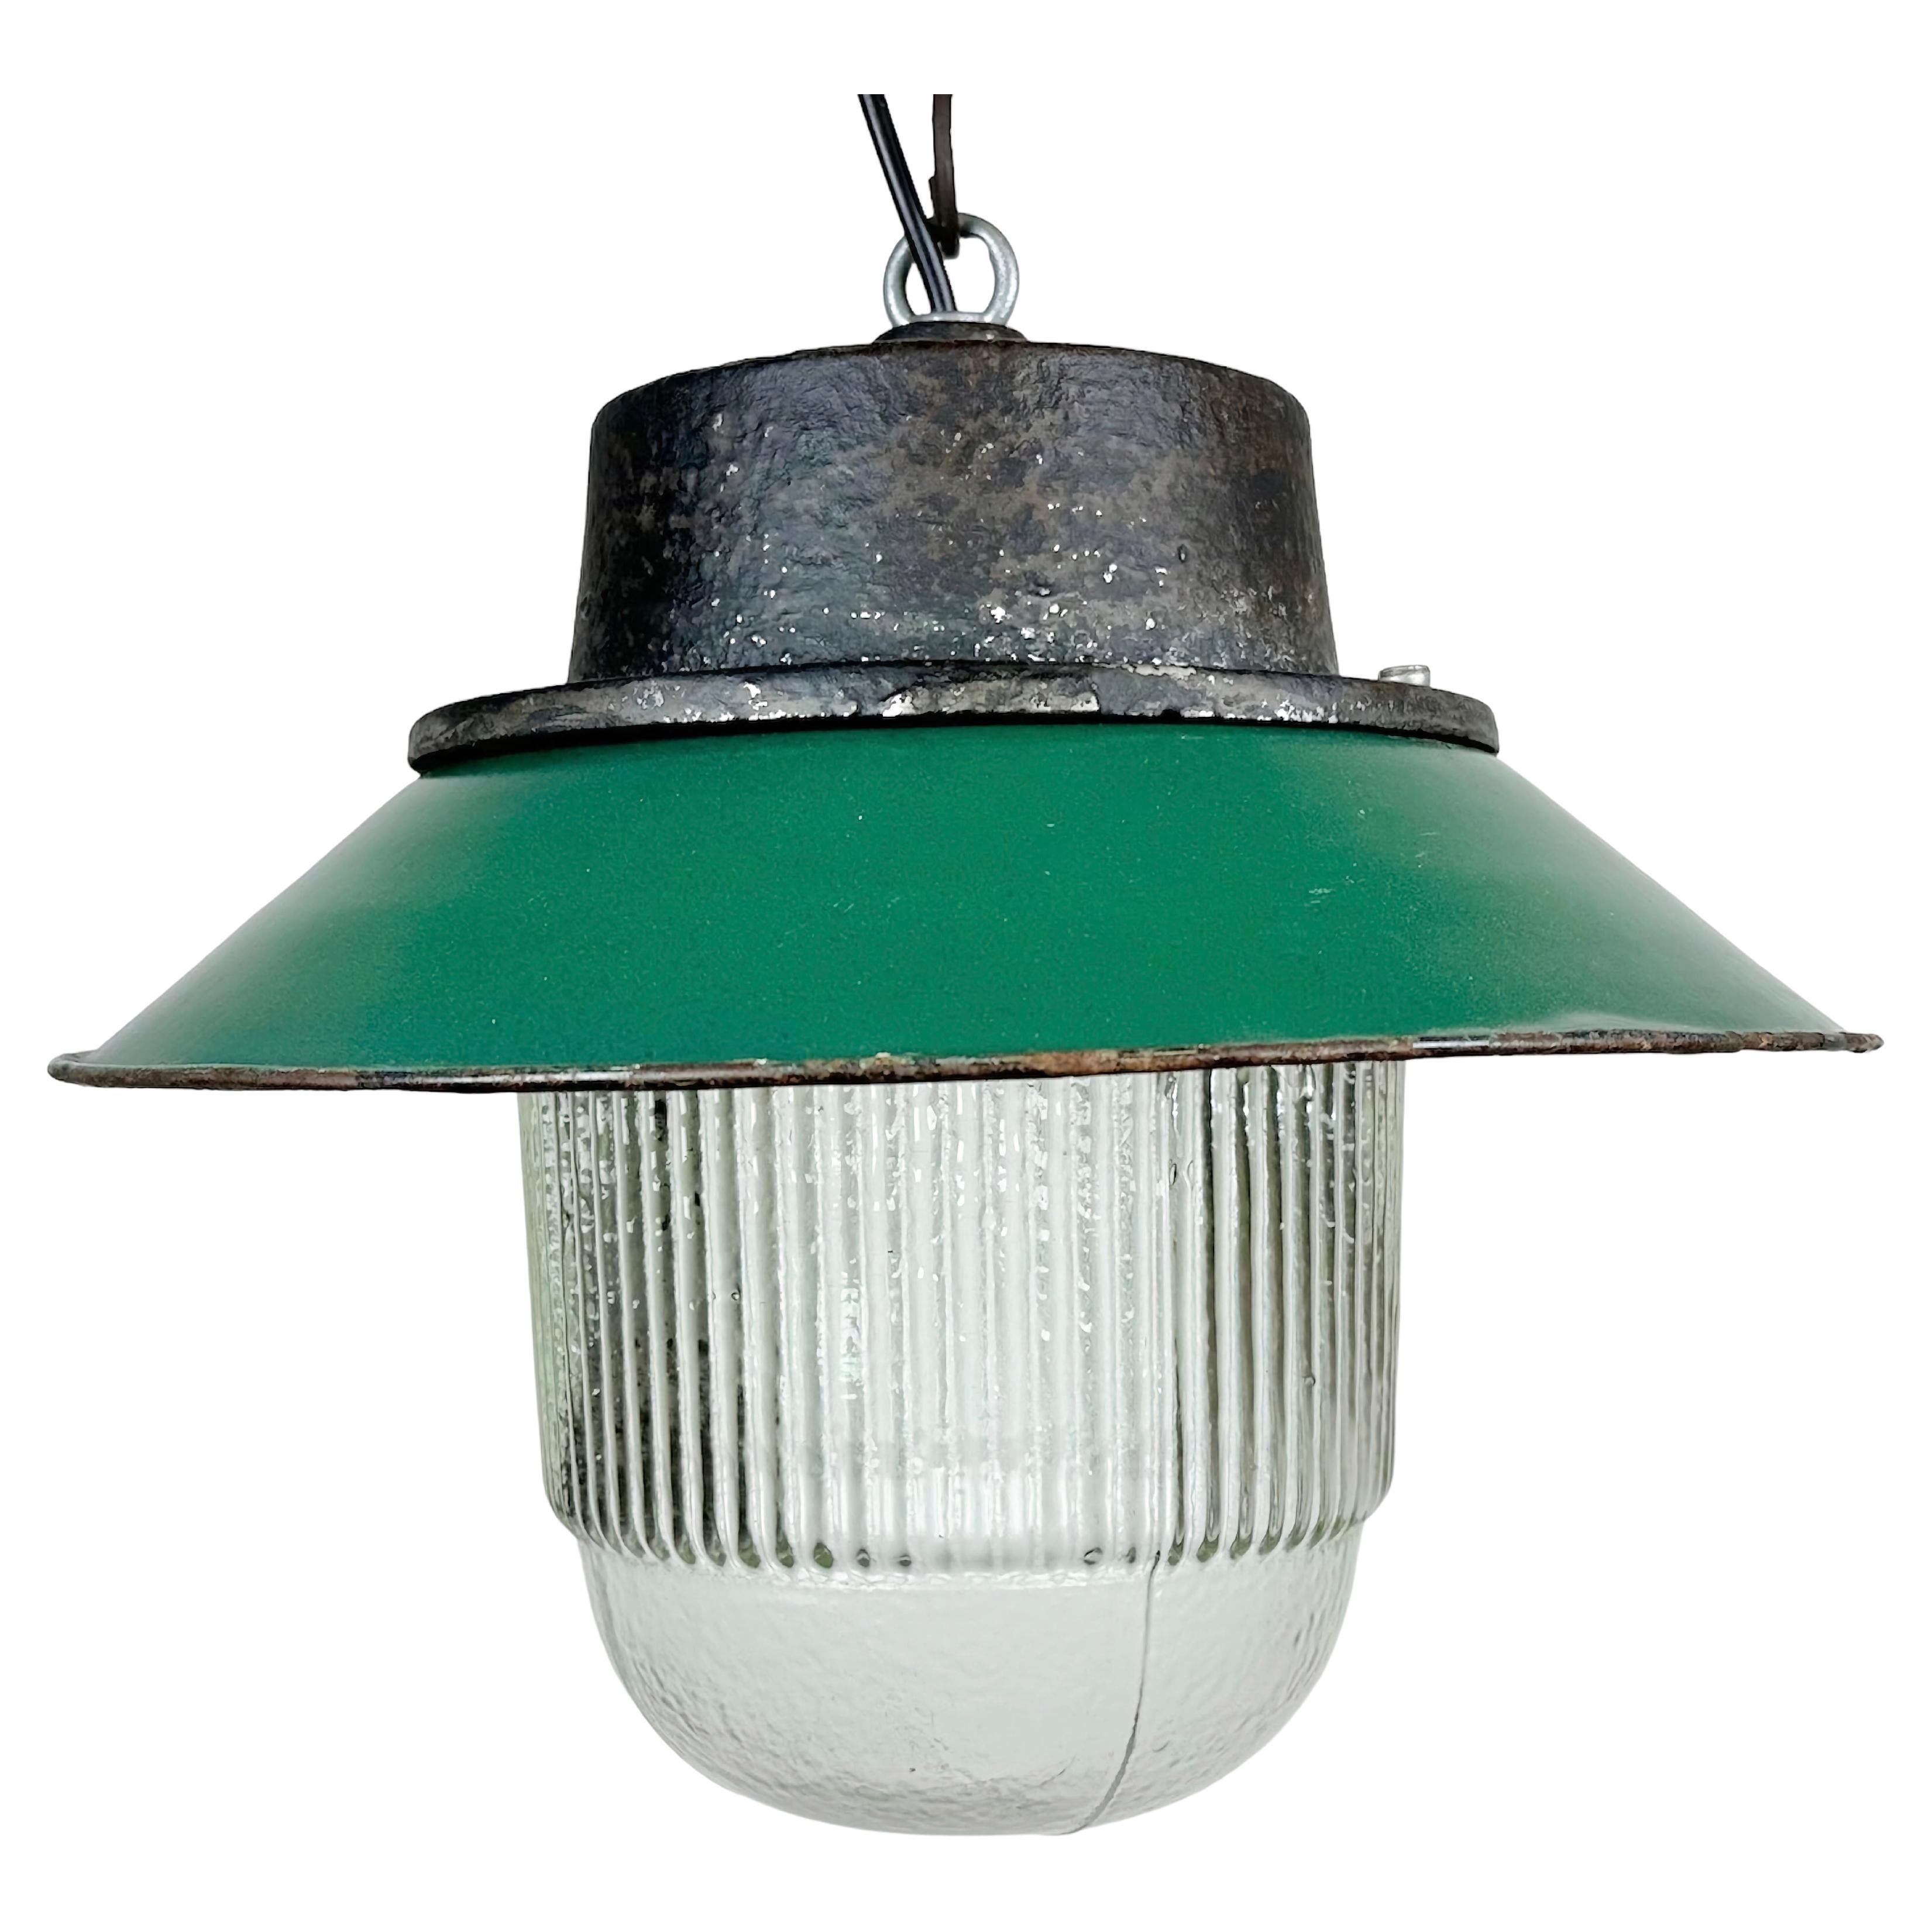 Green Enamel and Cast Iron Industrial Pendant Light, 1960s For Sale